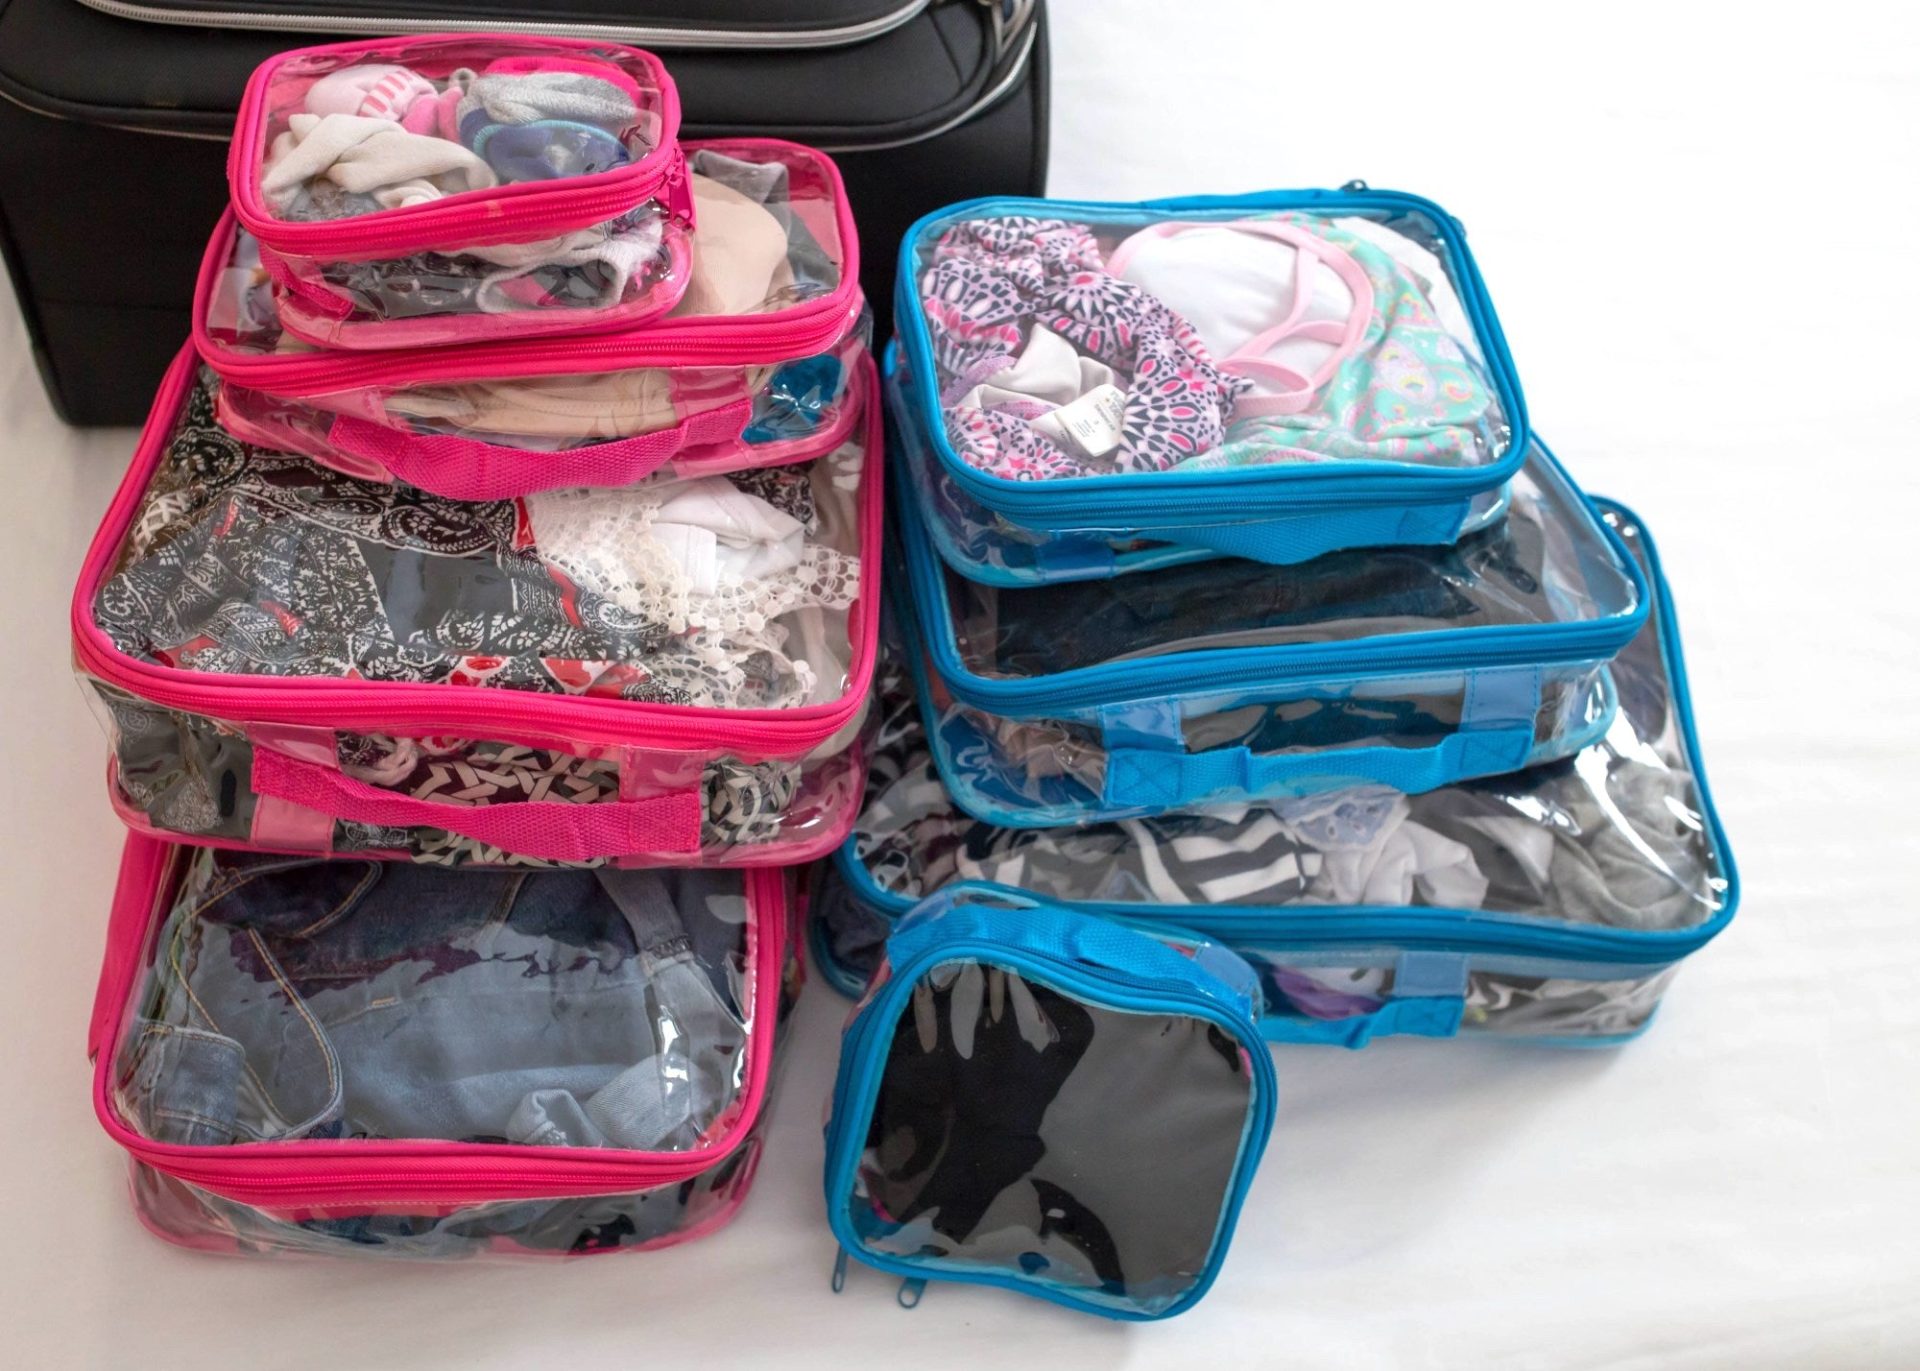 A set of pink and blue clear packing cubes for travel